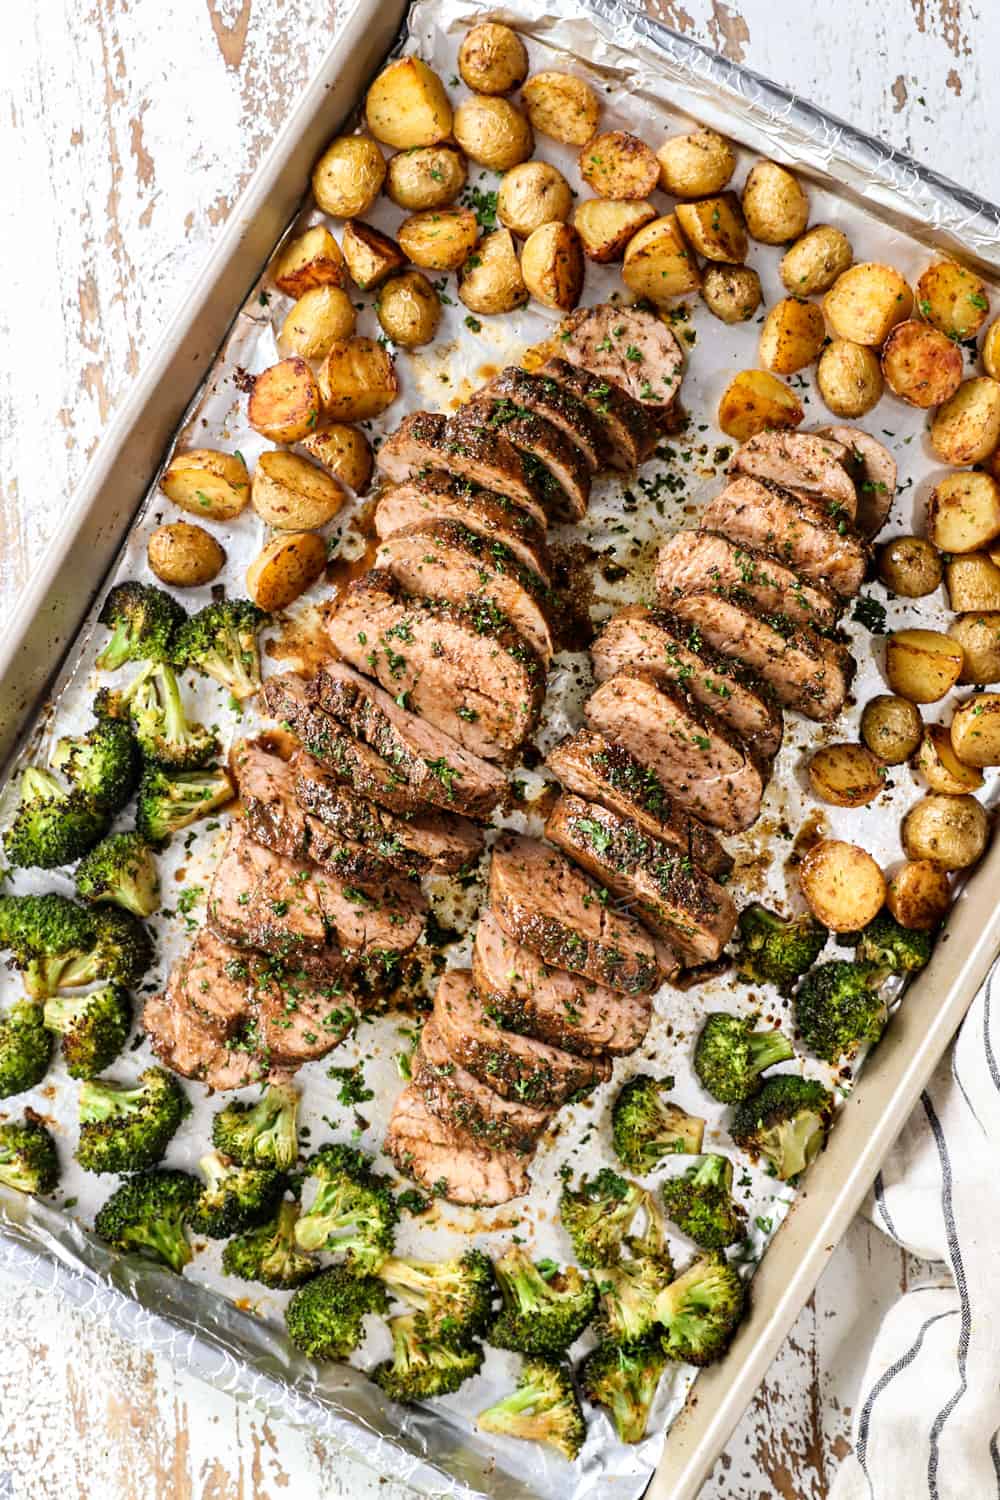 top view of balsamic roasted pork tenderloin sliced on a baking sheet oven roasted with potatoes and broccoli